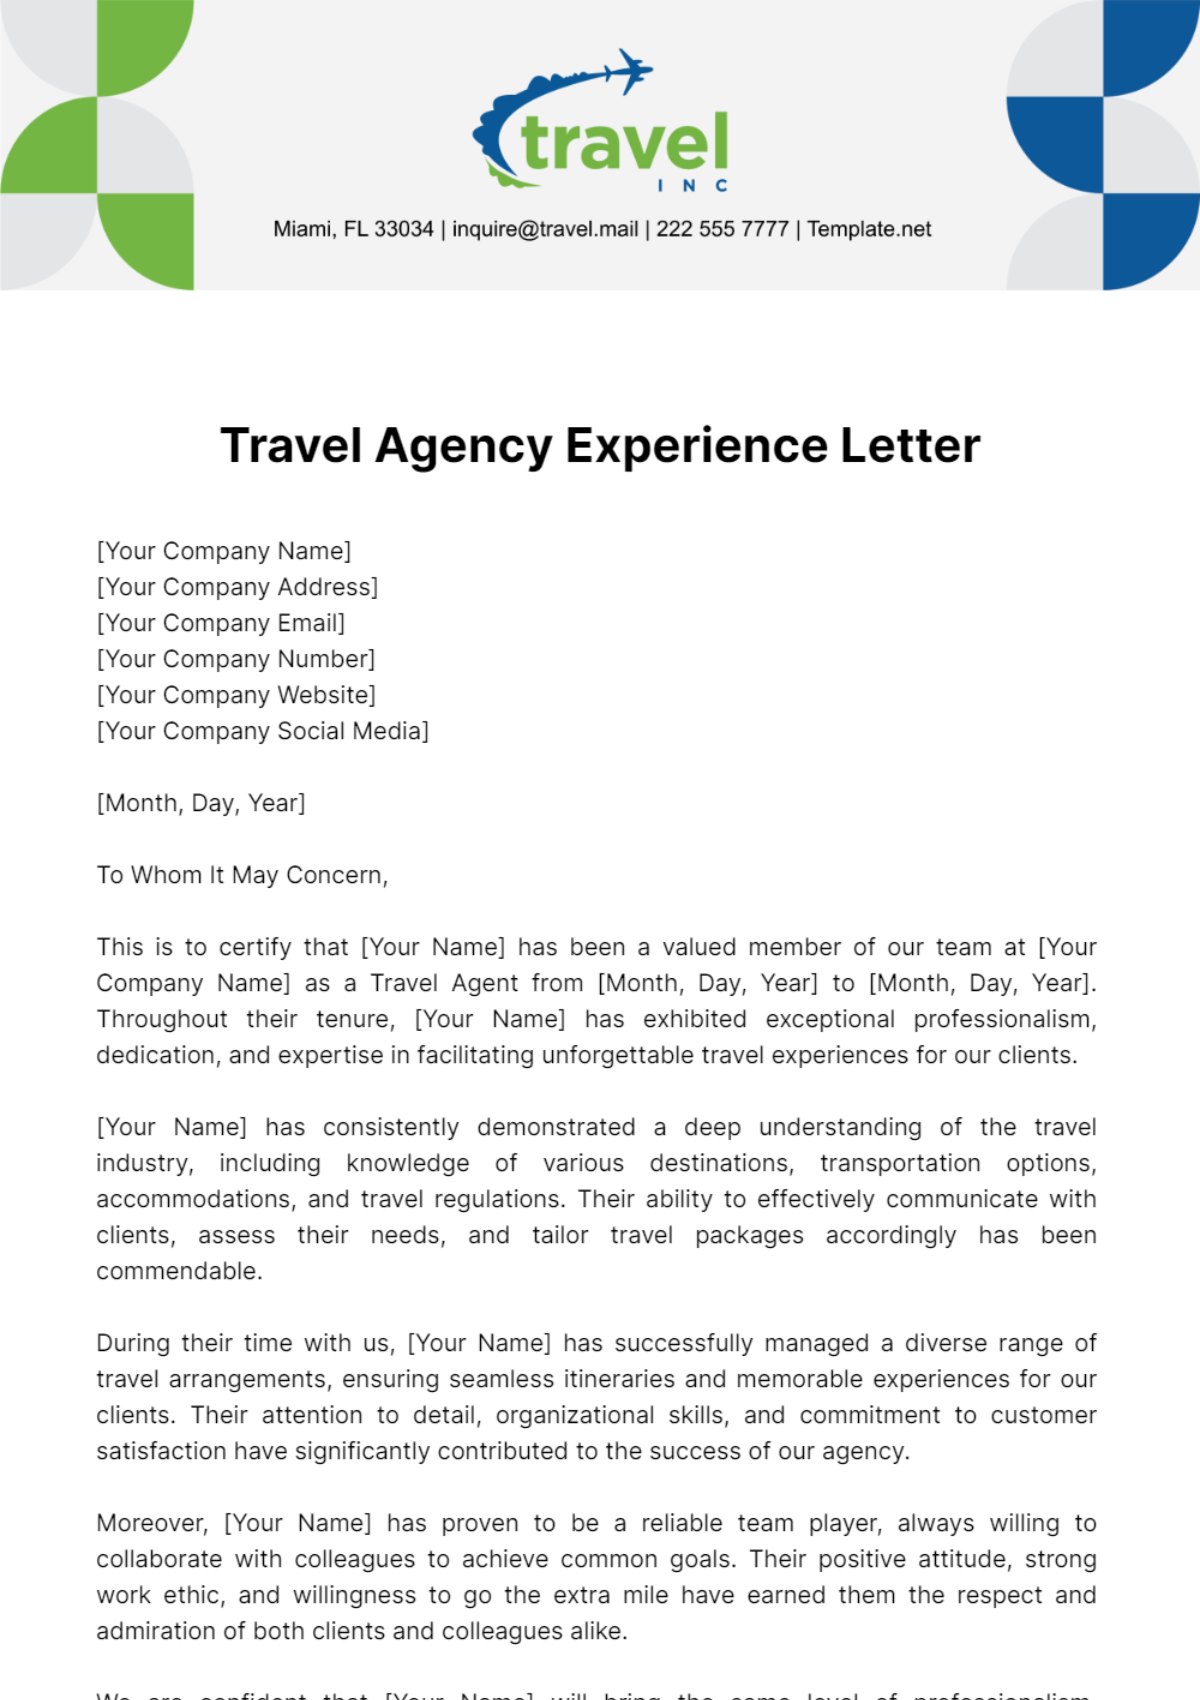 Travel Agency Experience Letter Template